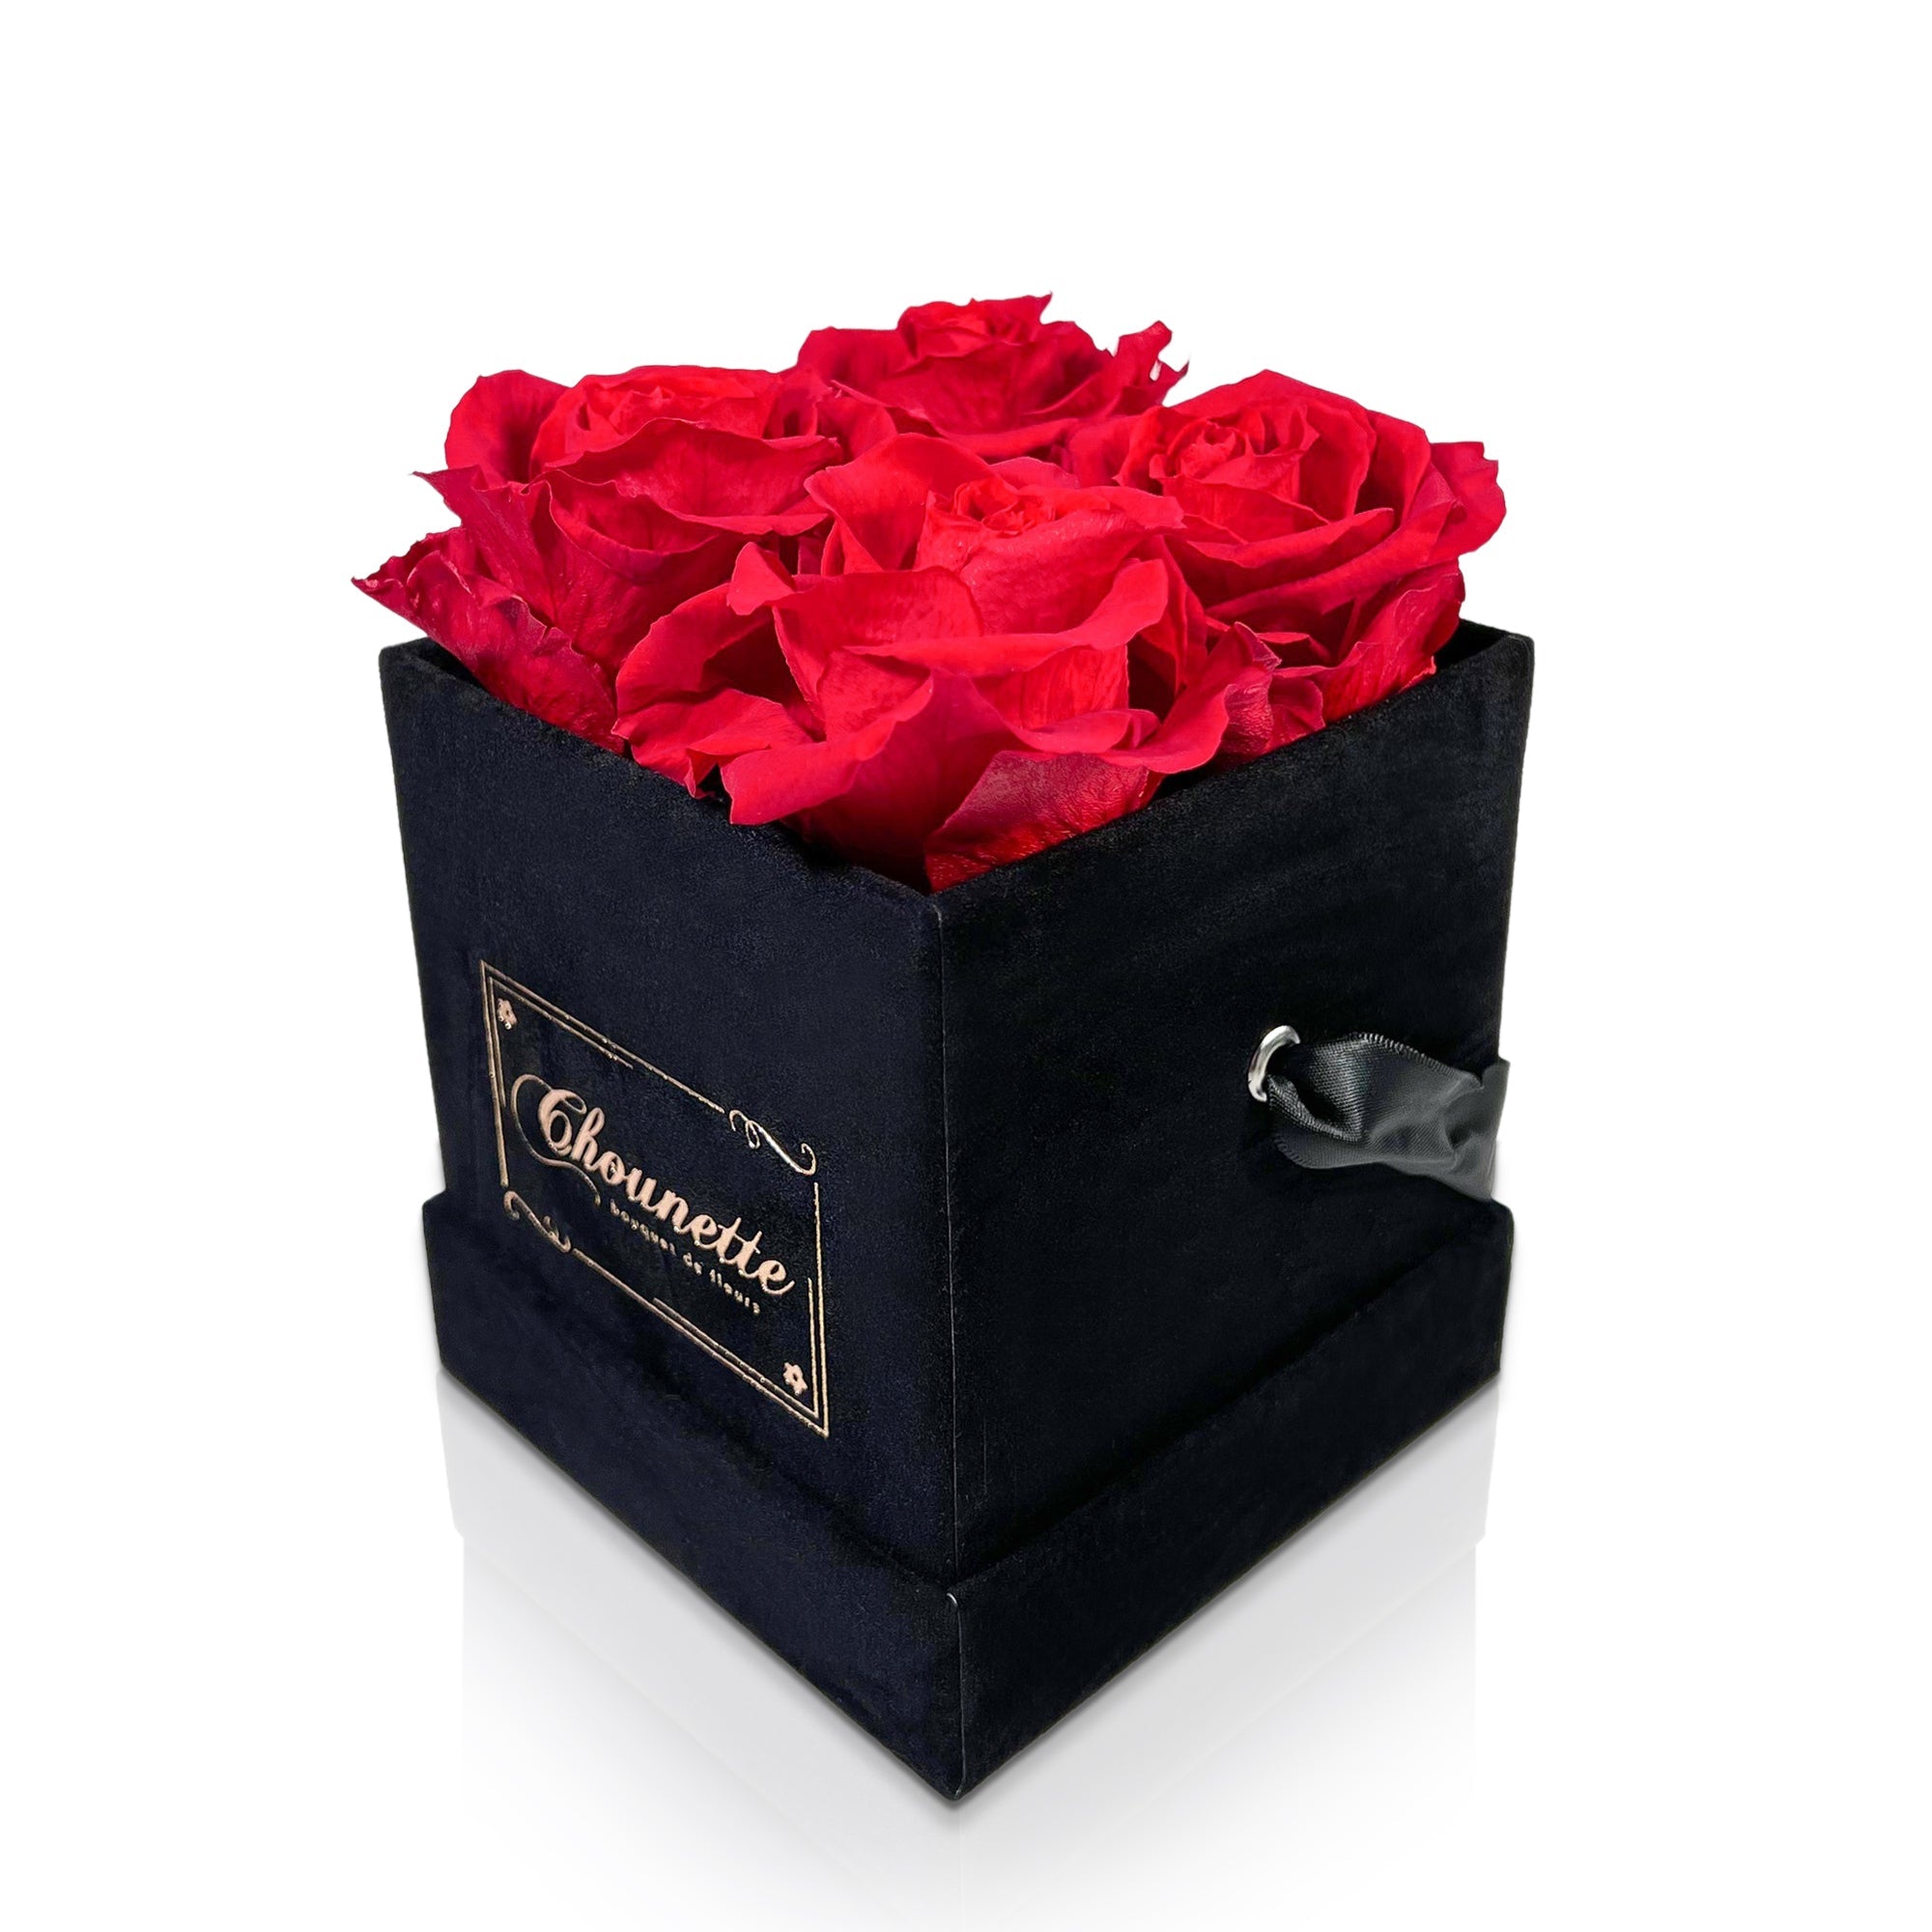 4 Preserved Roses in Premium Box (Lasts 1 Year!)